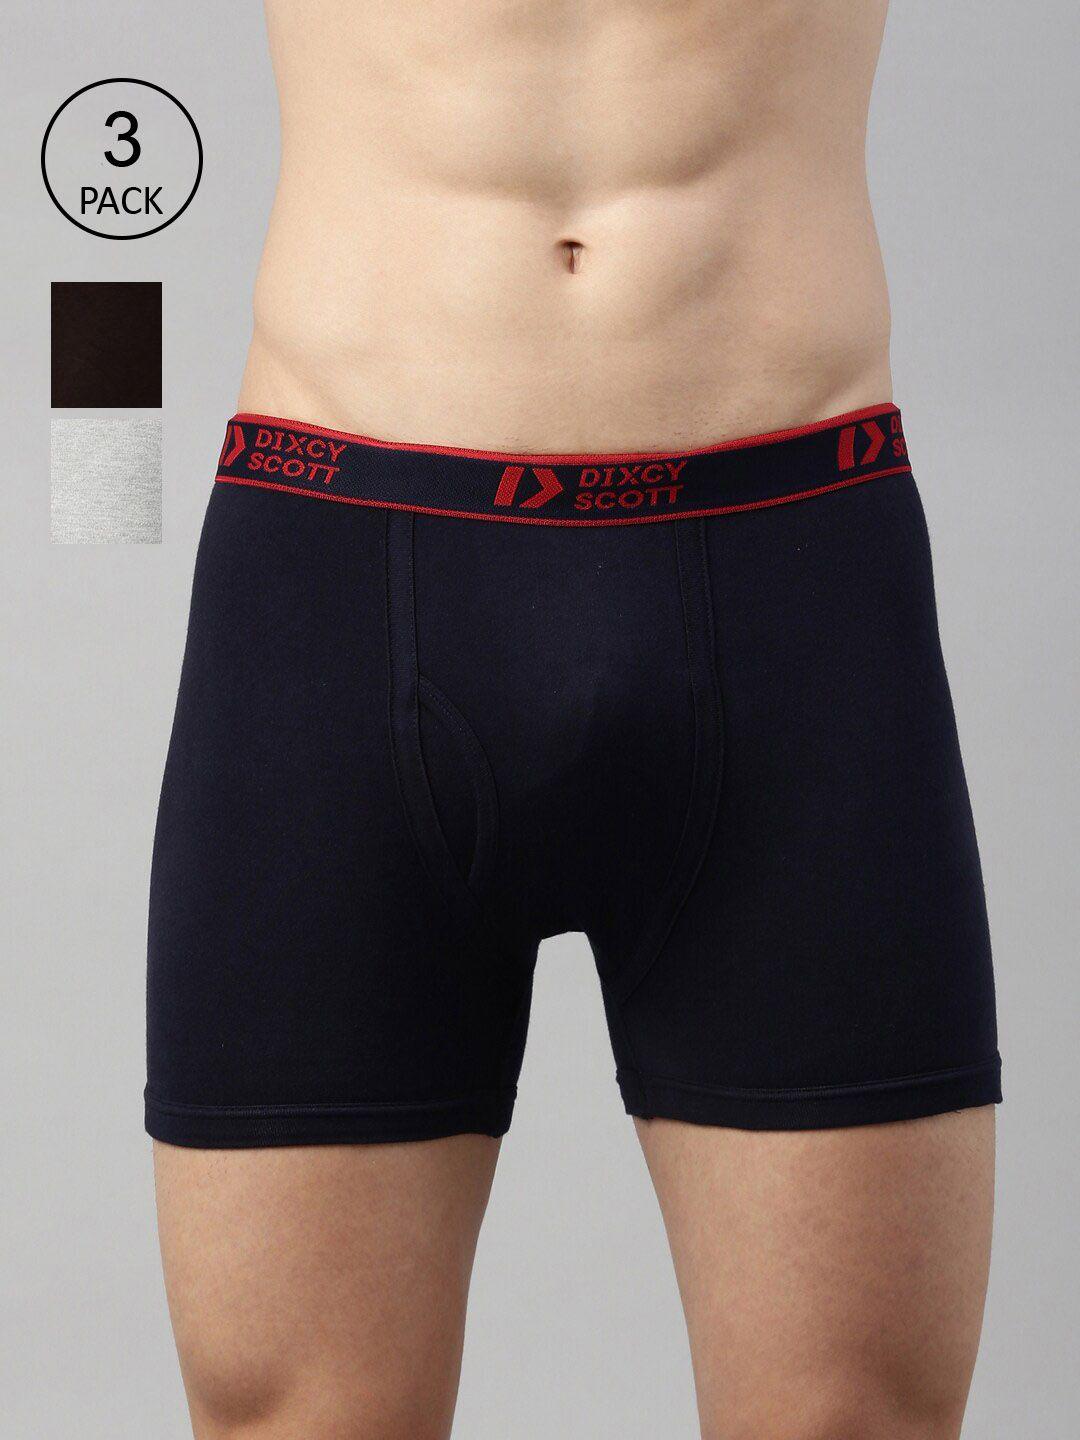 dixcy scott men pack of 3 solid pure cotton trunk dso-titan trunk-p3